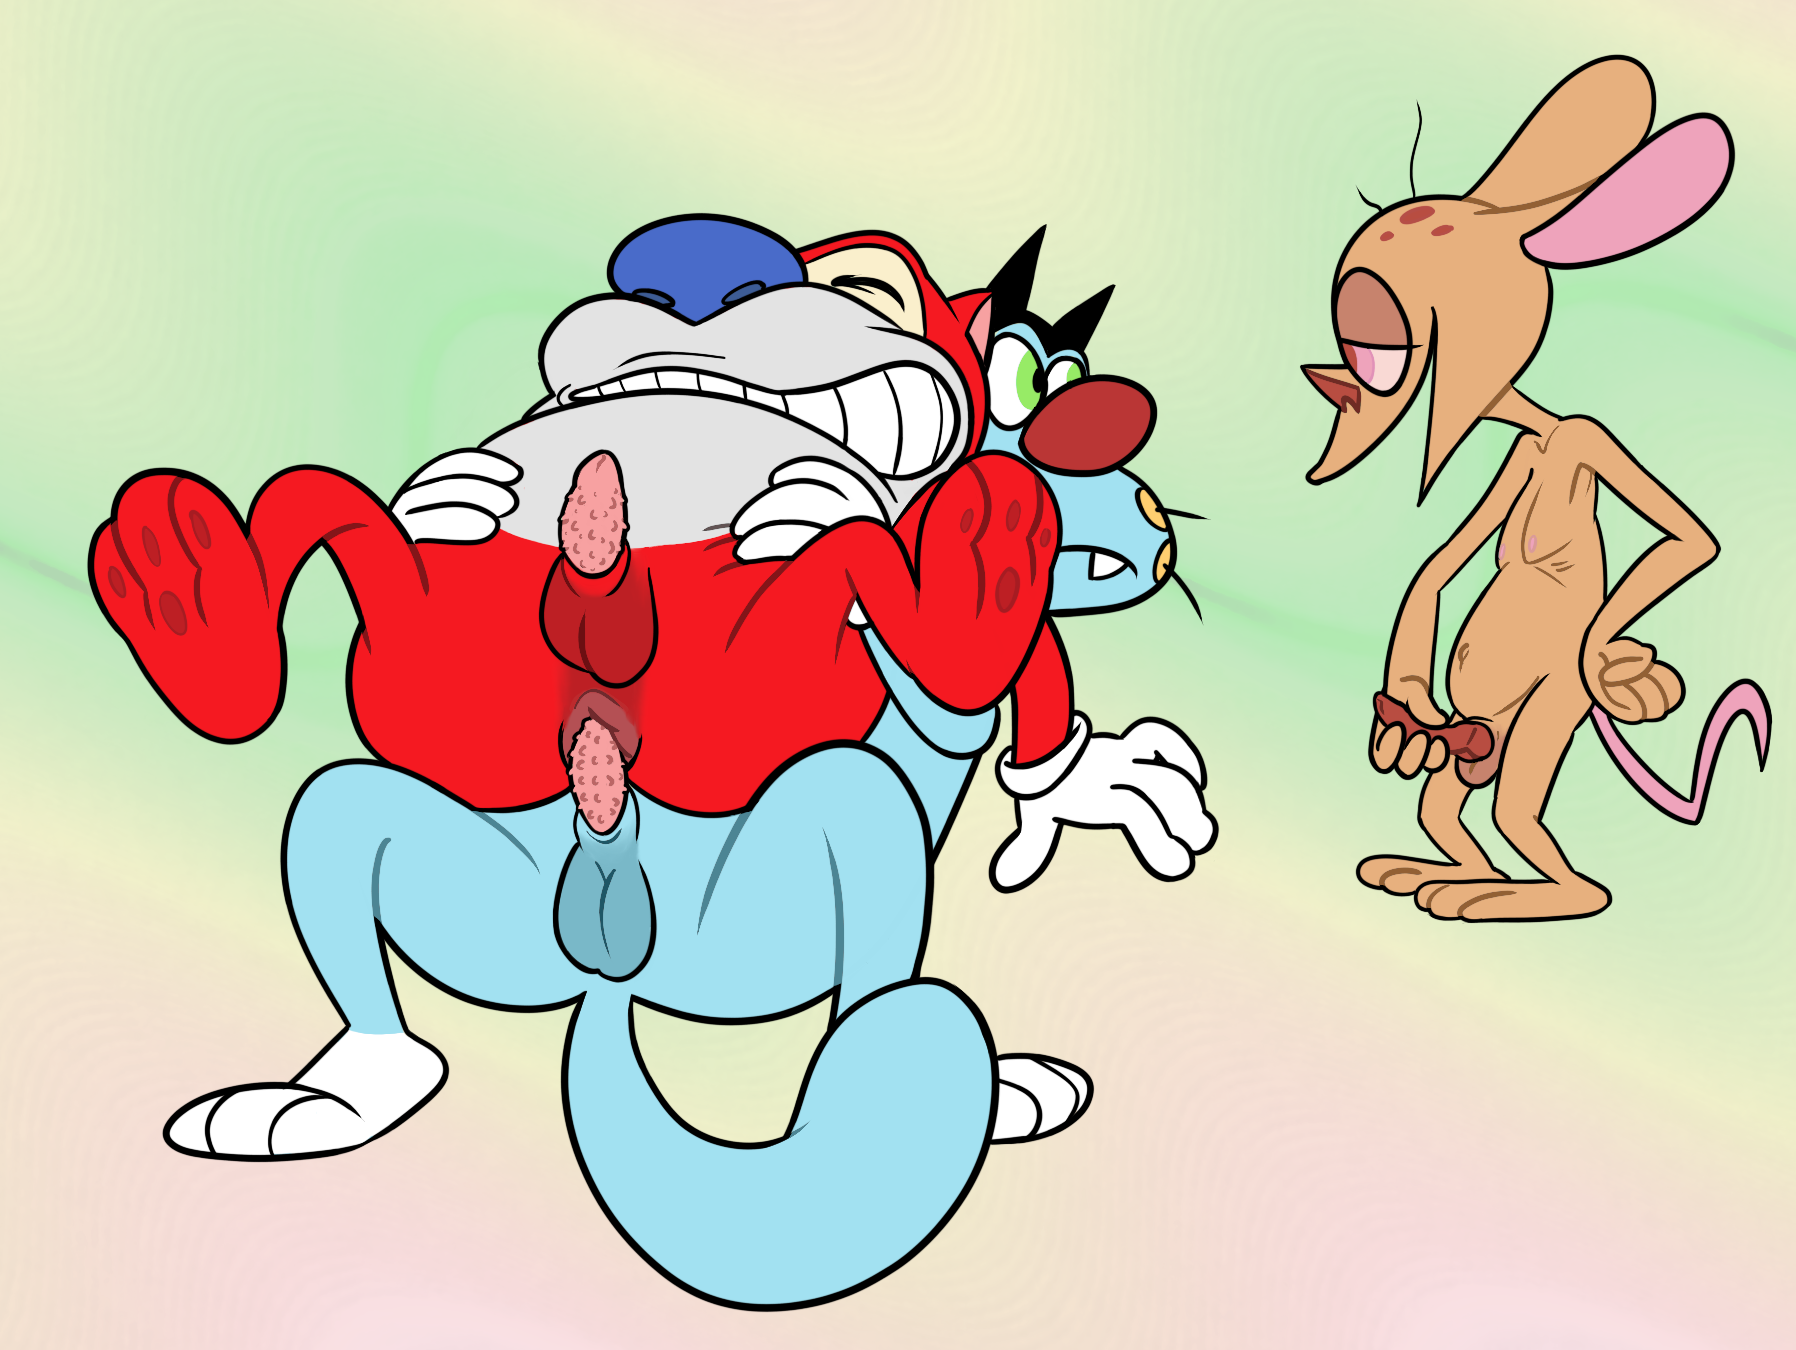 annie-mae, nickelodeon, oggy and the cockroaches, ren and stimpy, 2019, dig...